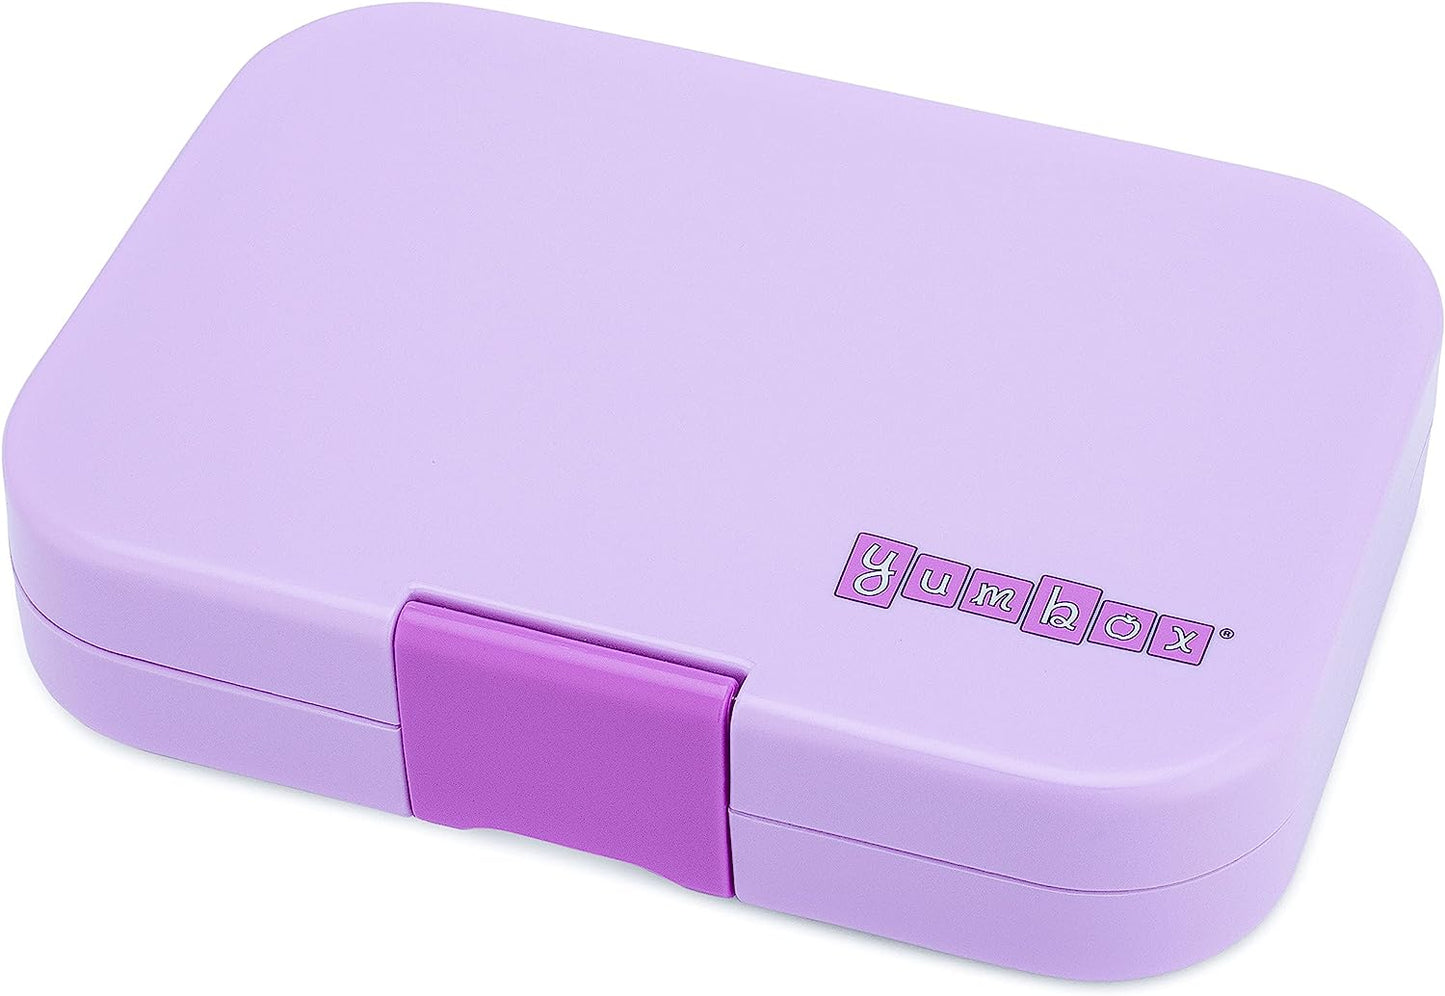 Leakproof Bento Lunchbox Original By Yumbox